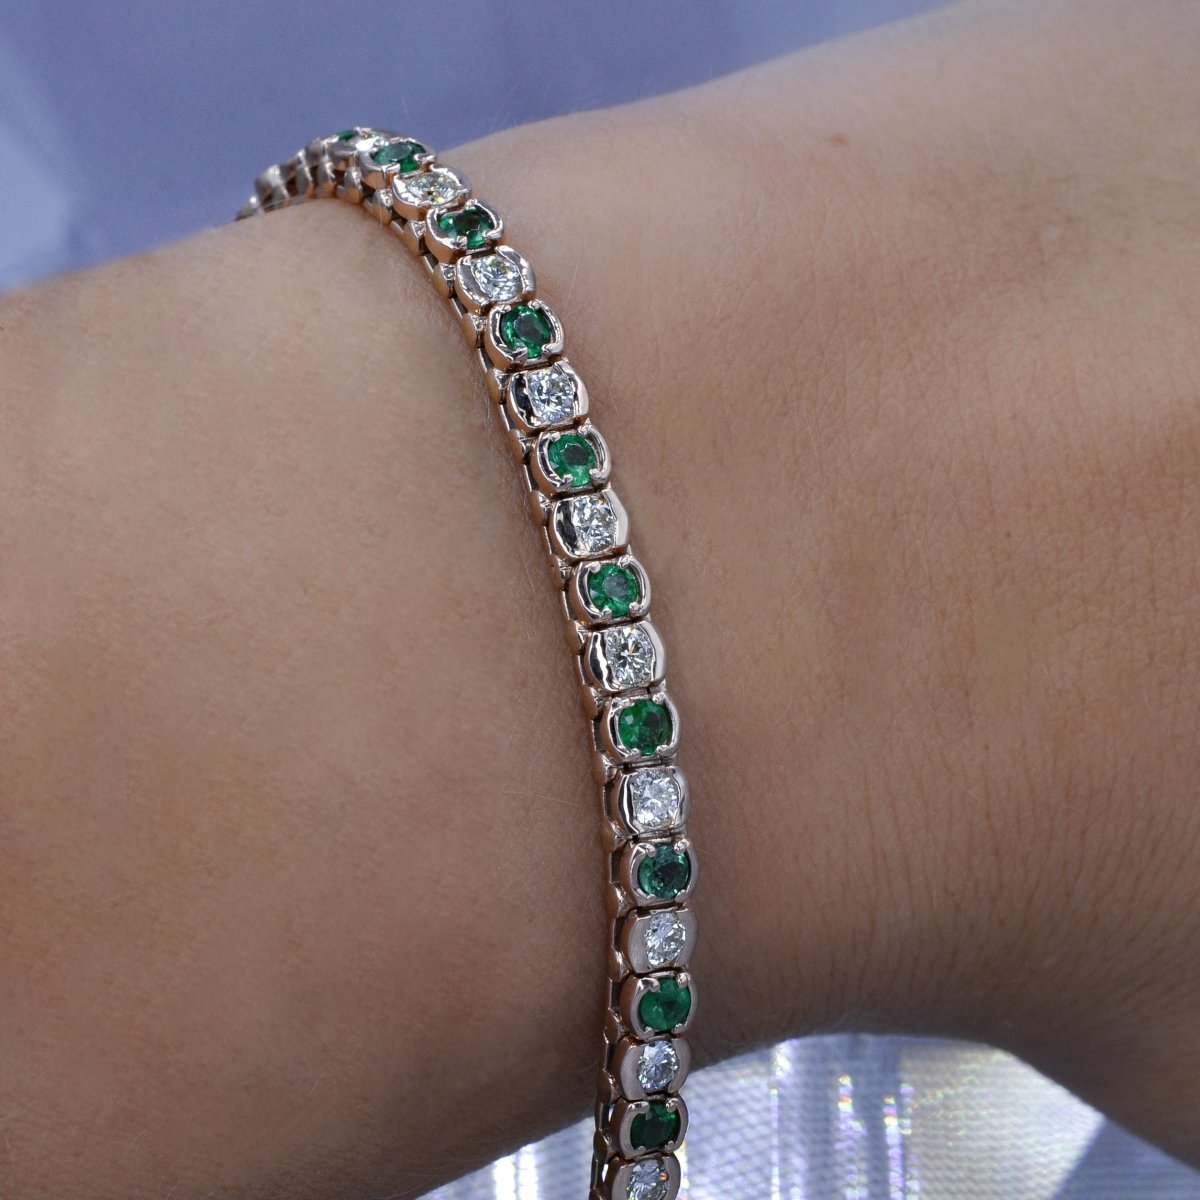 Special 6.00 CT Round Cut Diamond and Green Emerald Tennis Bracelet in 14KT Rose Gold - Primestyle.com